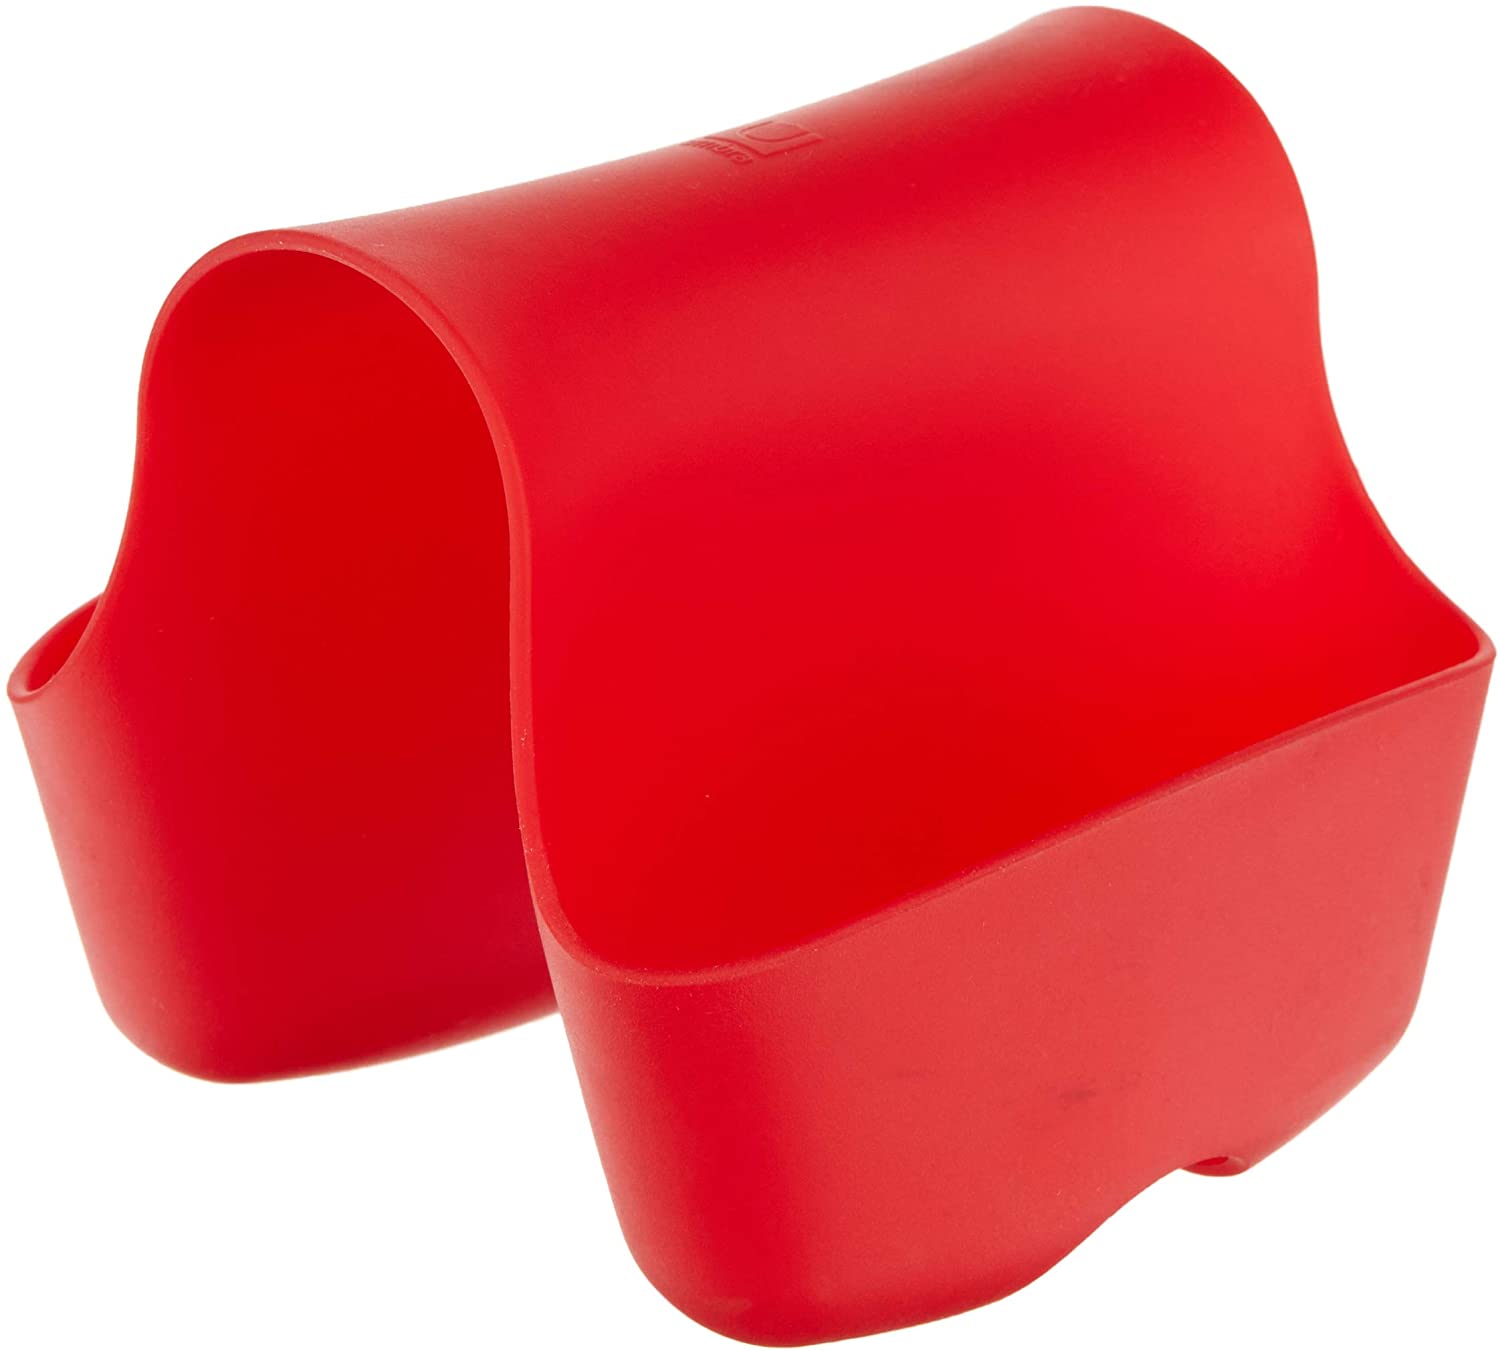 Umbra Saddle Small Sink Caddy, Red